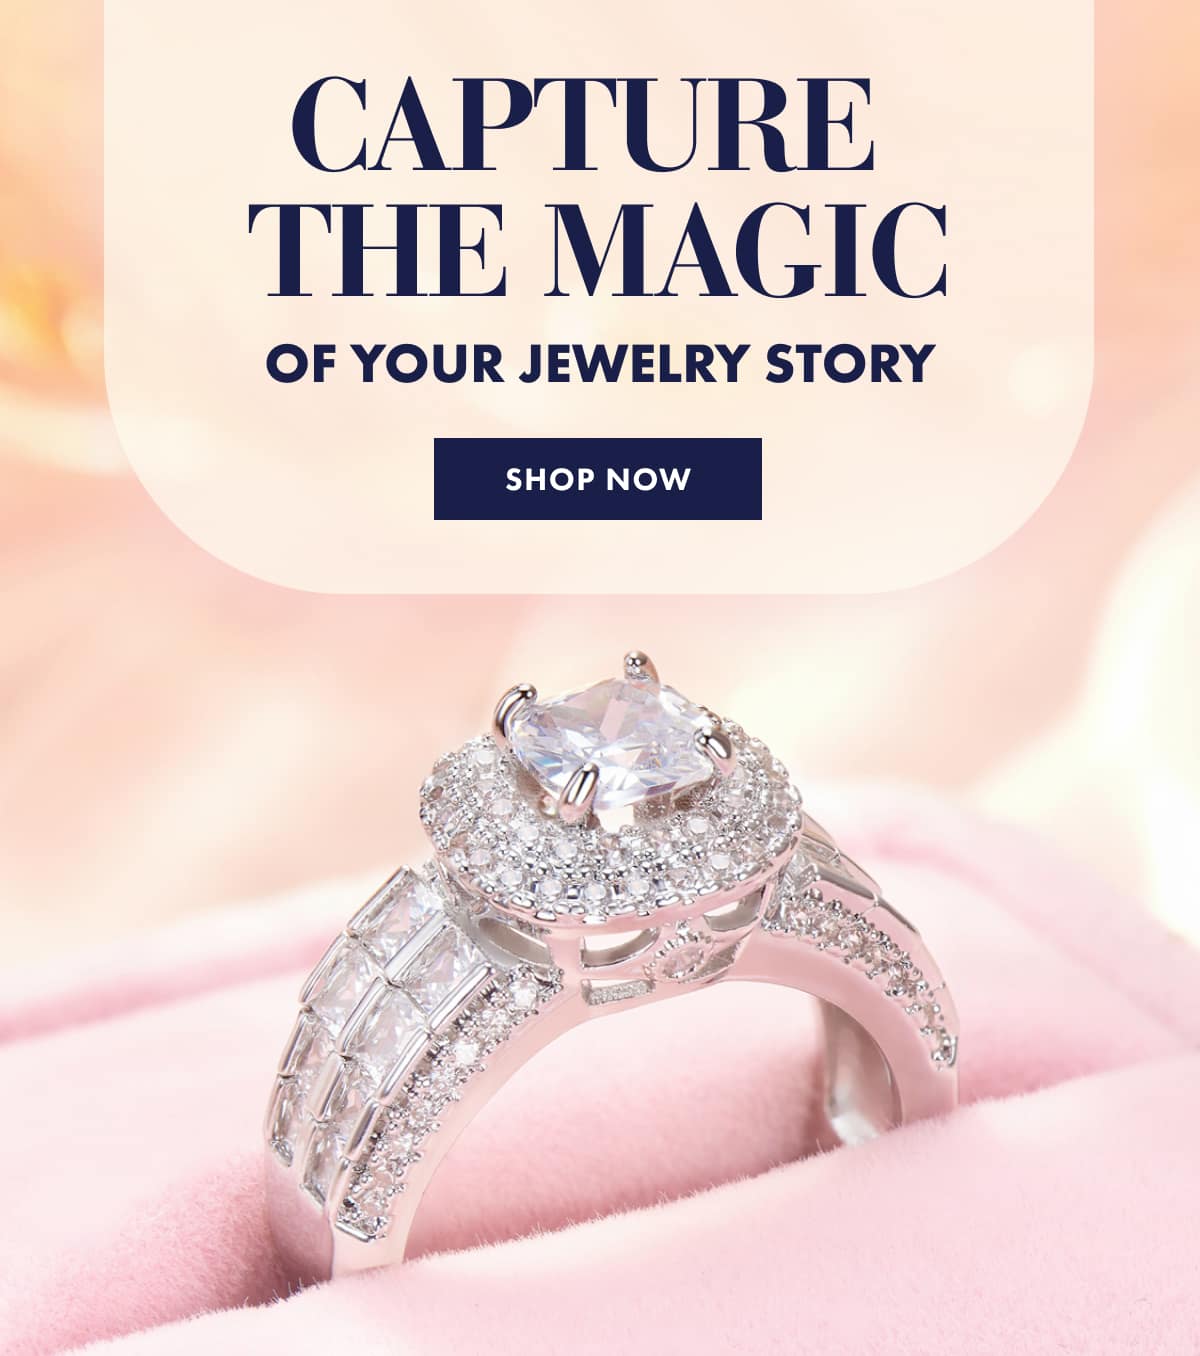 Capture the Magic of Your Jewelry Story